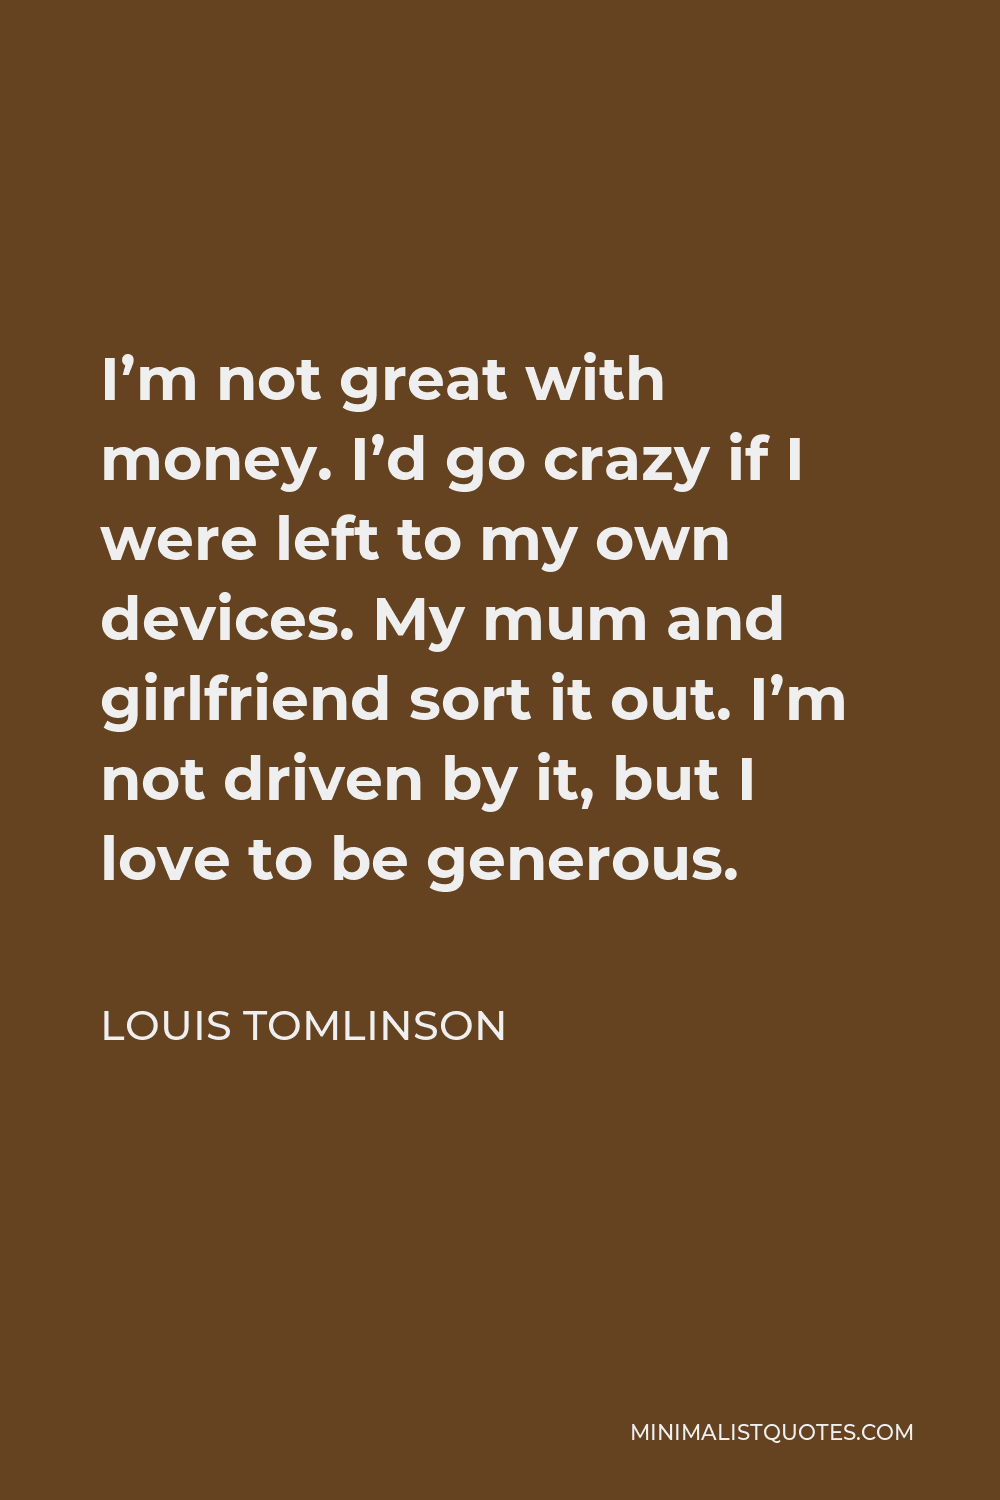 Louis Tomlinson Quote - I’m not great with money. I’d go crazy if I were left to my own devices. My mum and girlfriend sort it out. I’m not driven by it, but I love to be generous.